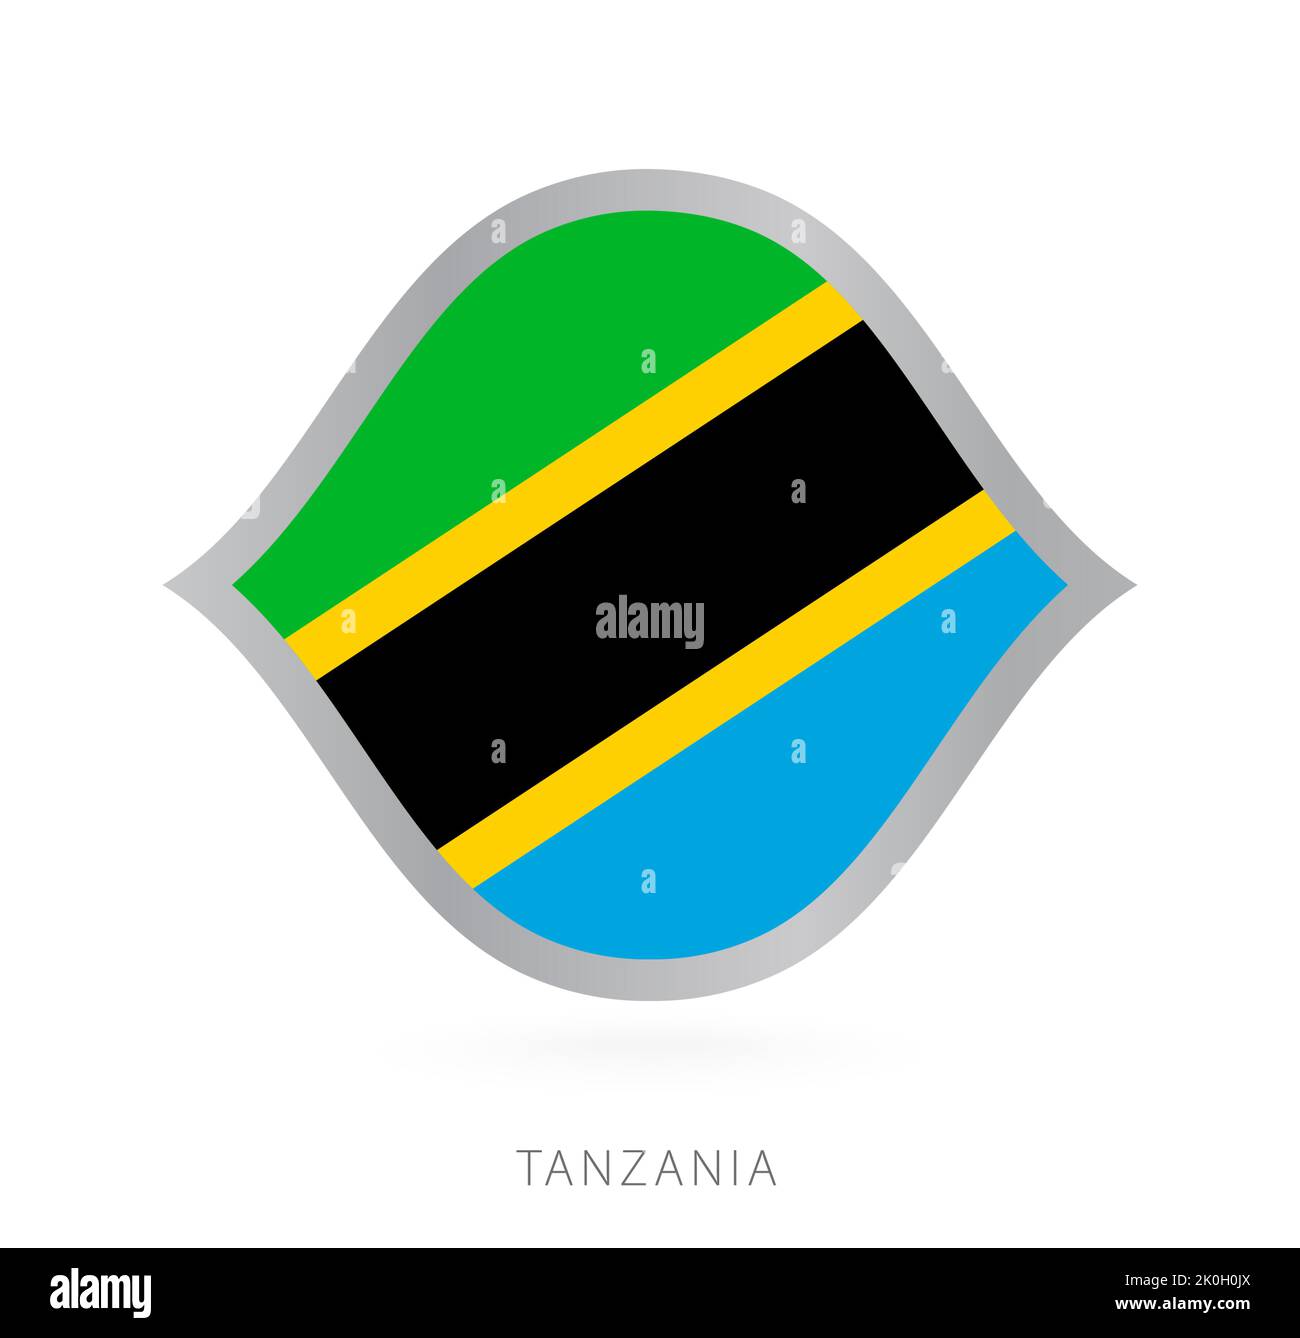 Tanzania national team flag in style for international basketball competitions. Vector sign. Stock Vector